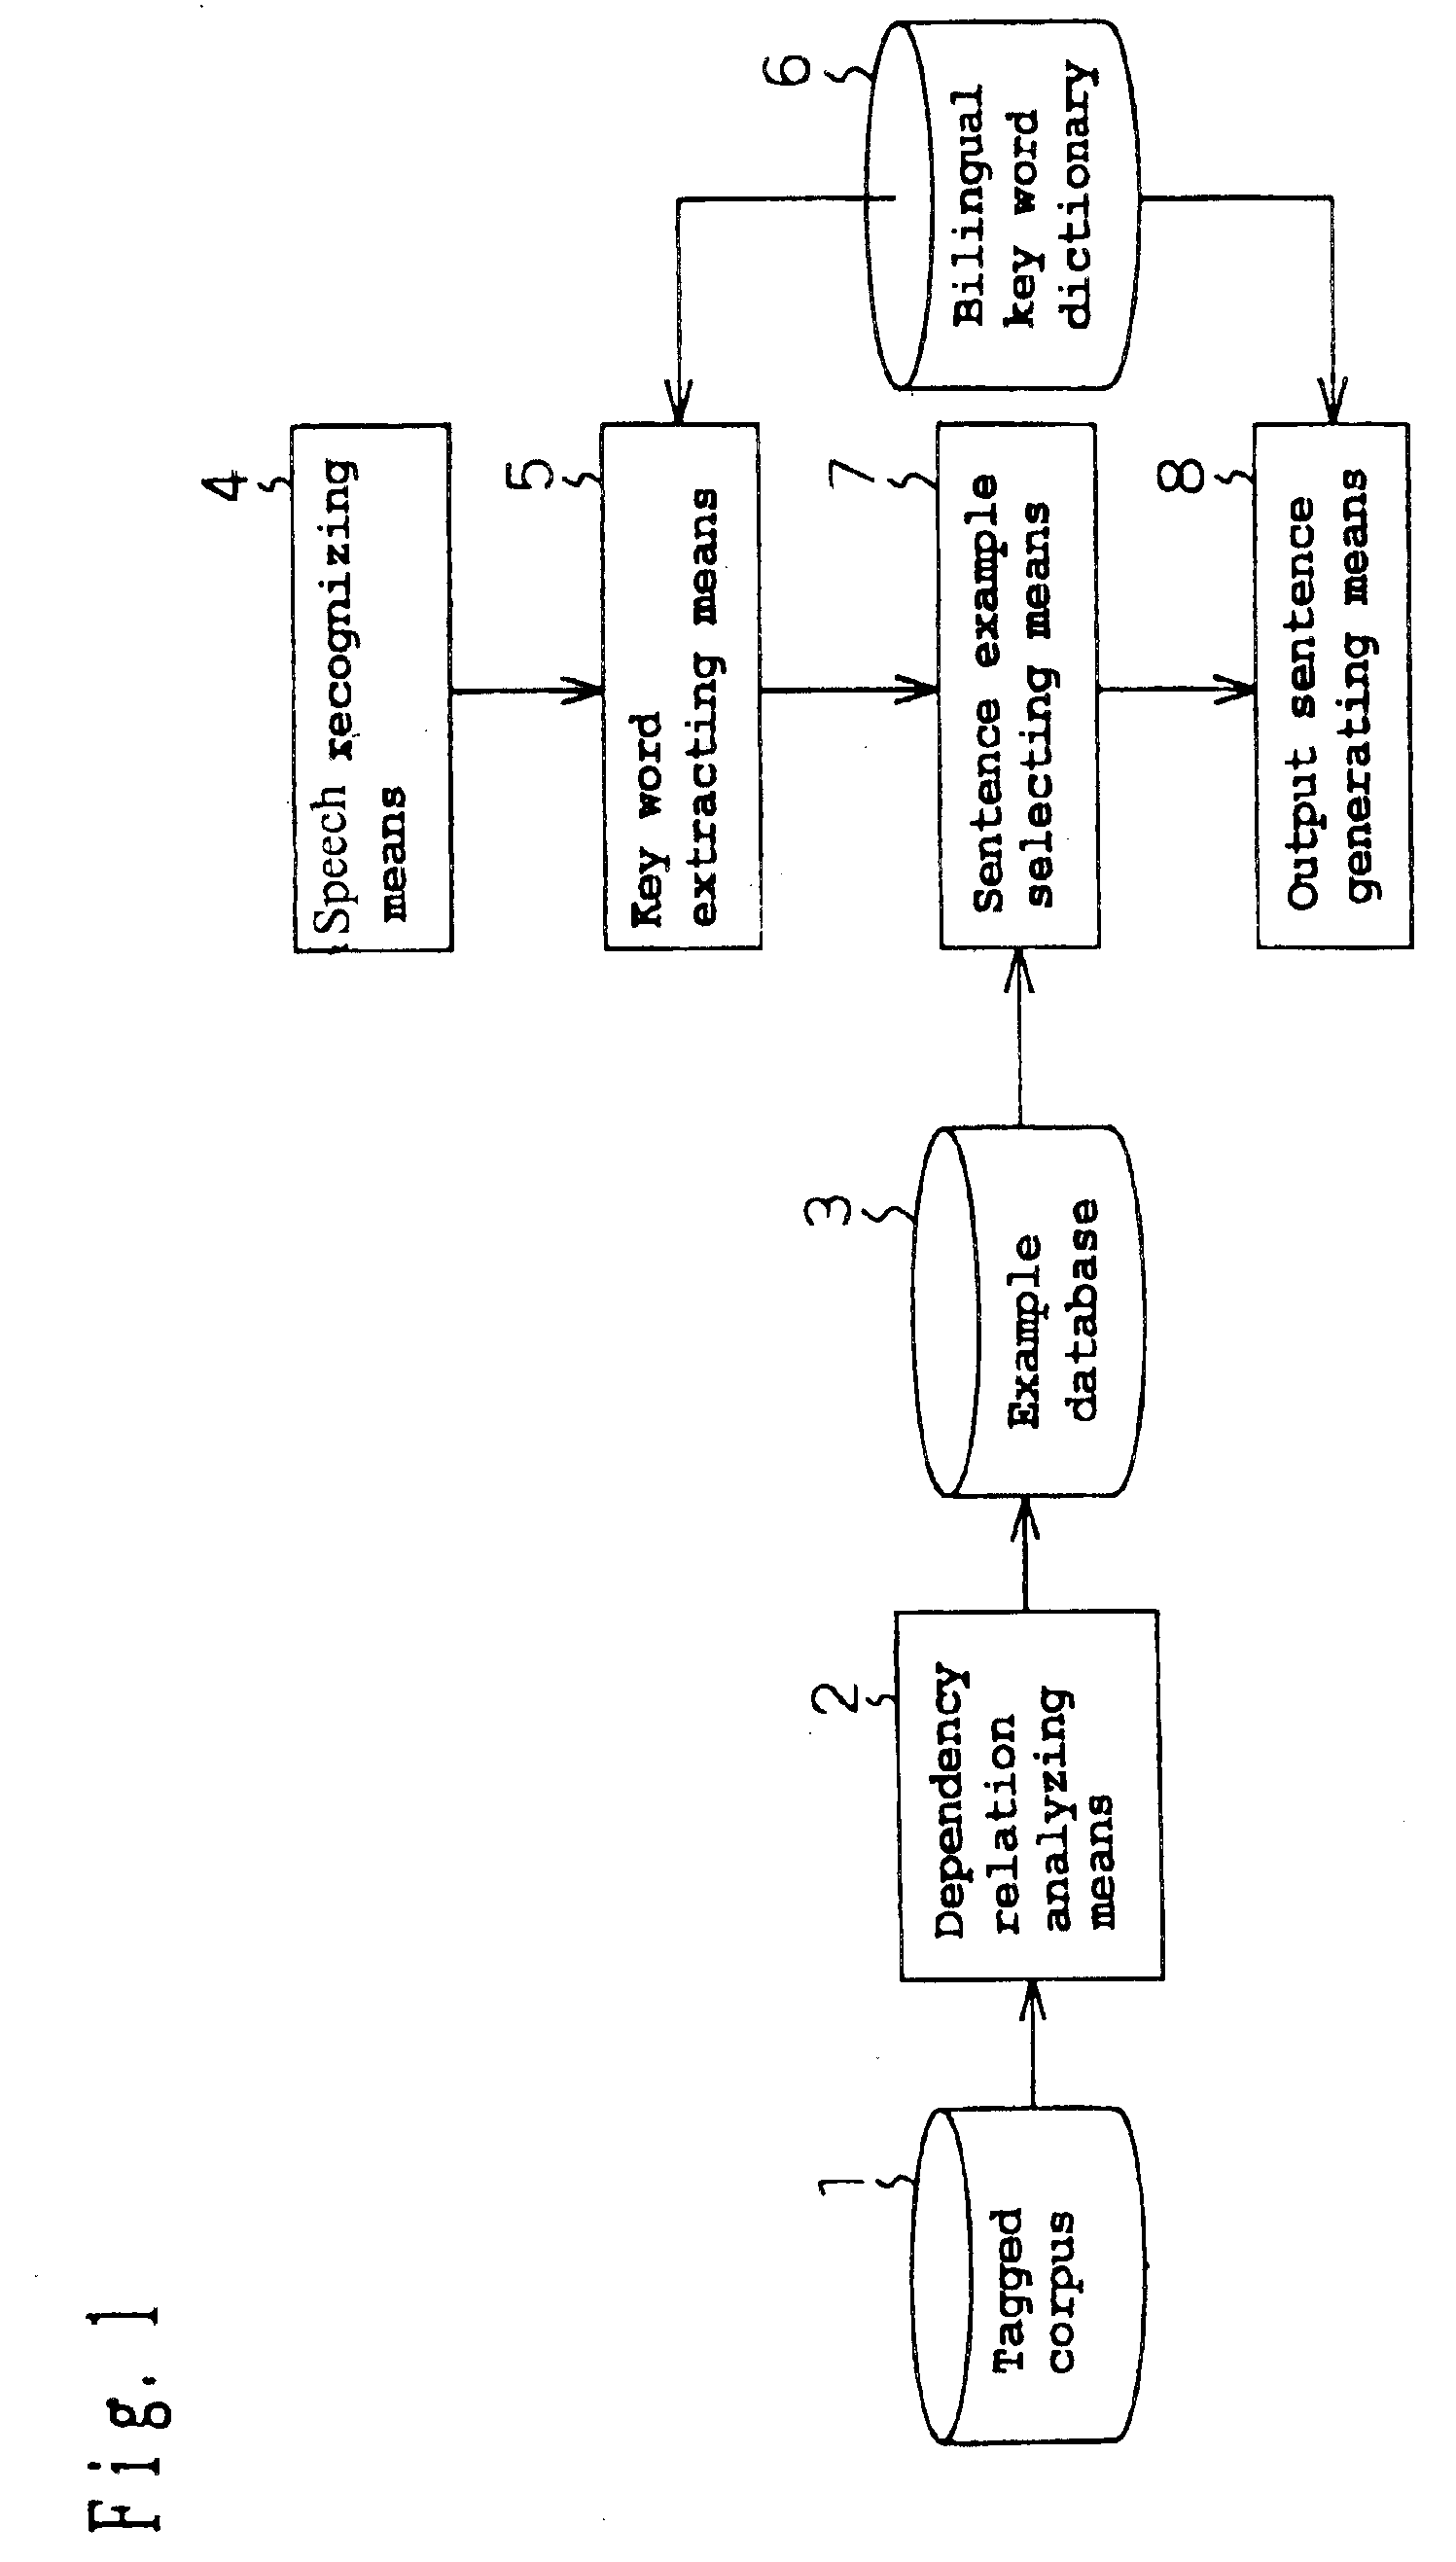 Method and apparatus for converting an expression using key words